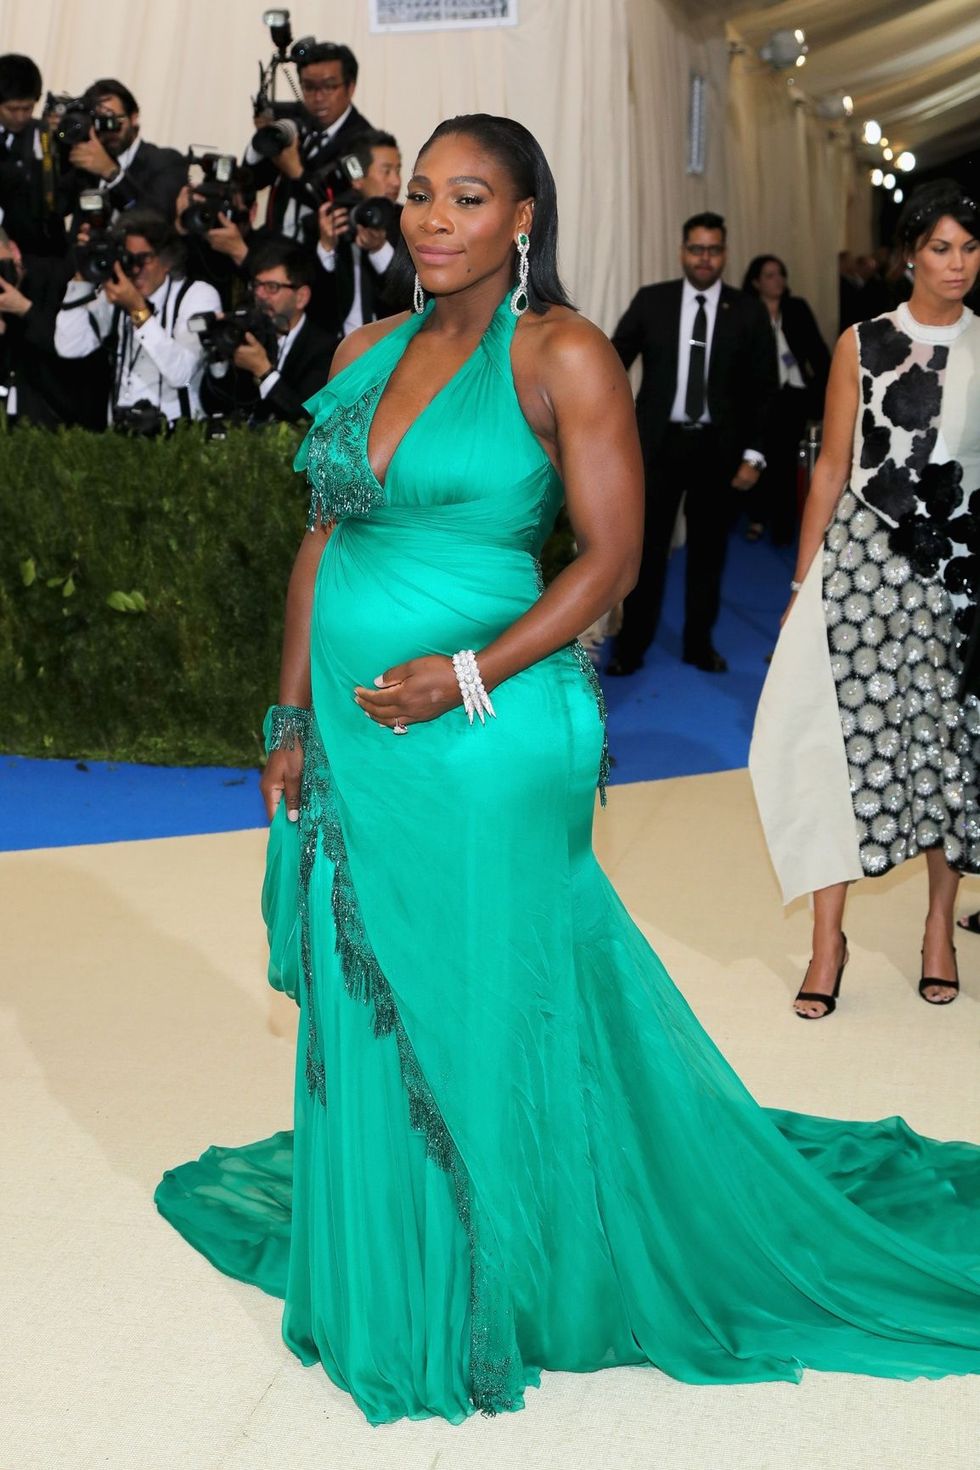 Serena Williams Debuted Her Baby Bump on the Met Gala Red Carpet